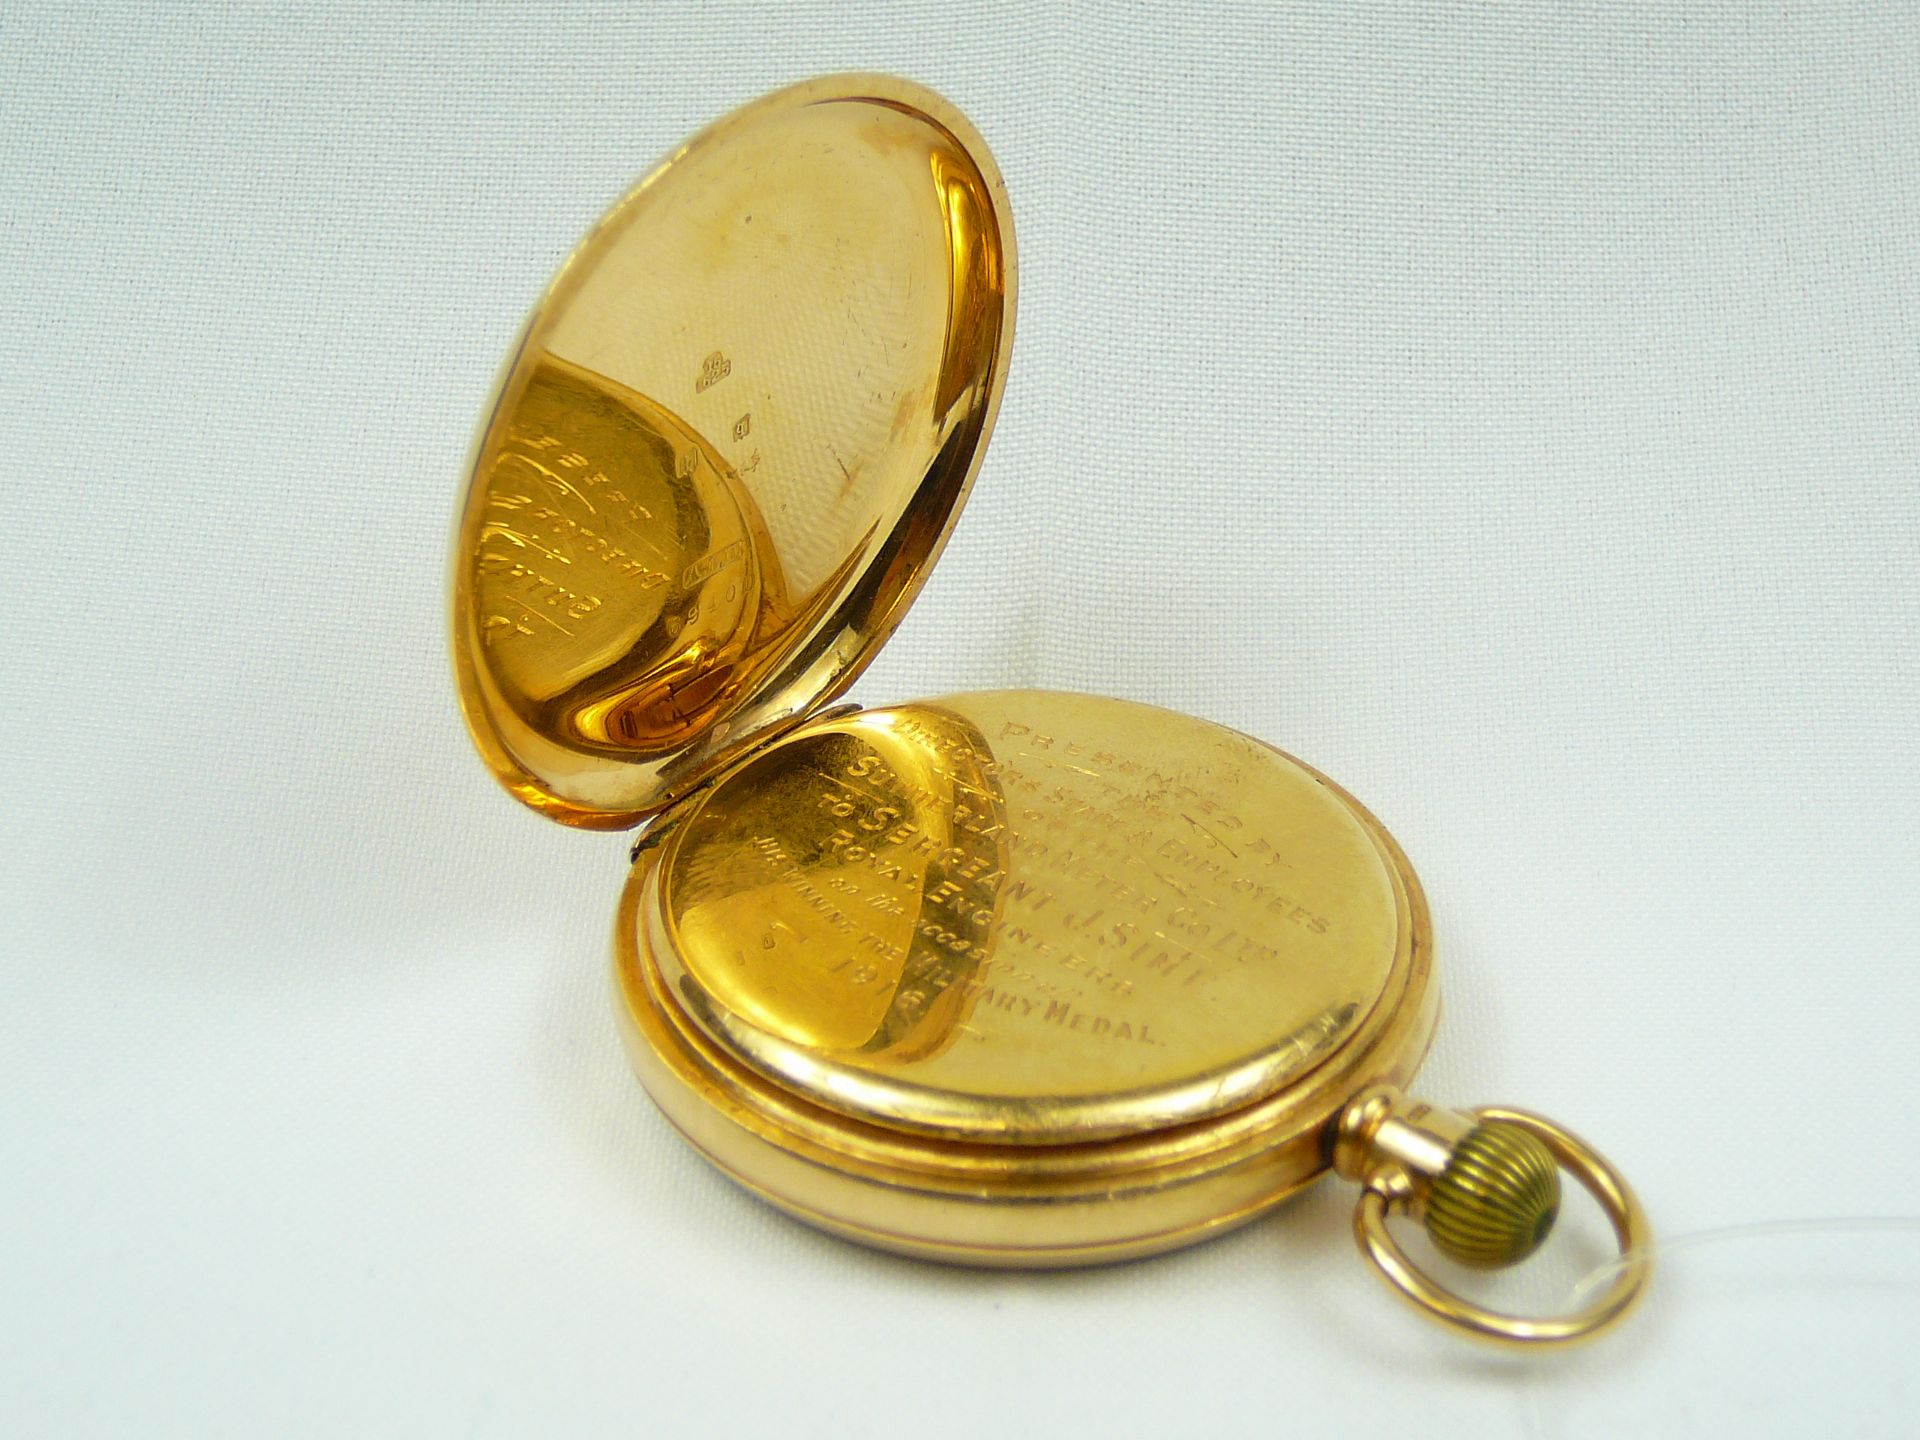 Gents gold pocket watch - Image 4 of 7